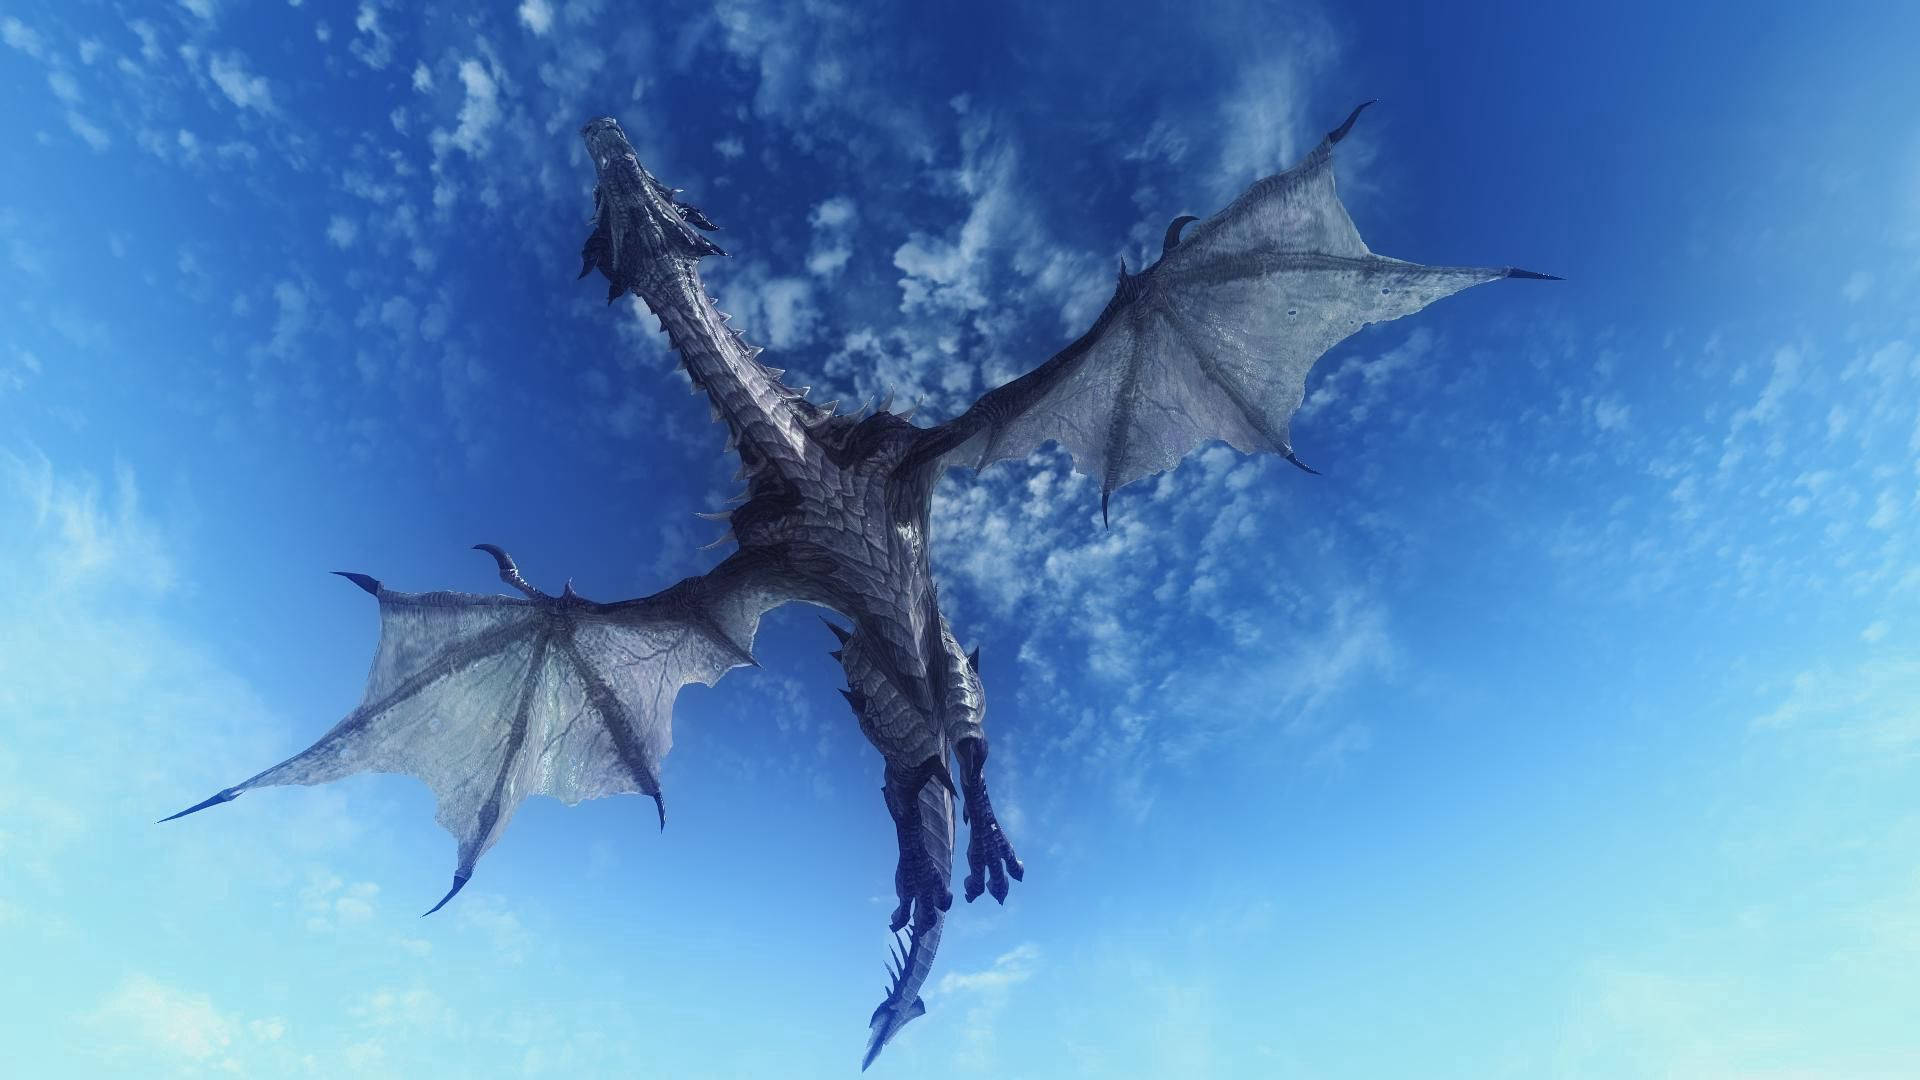 A larger-than-life dragon taking off and flying over an epic wilderness. Wallpaper